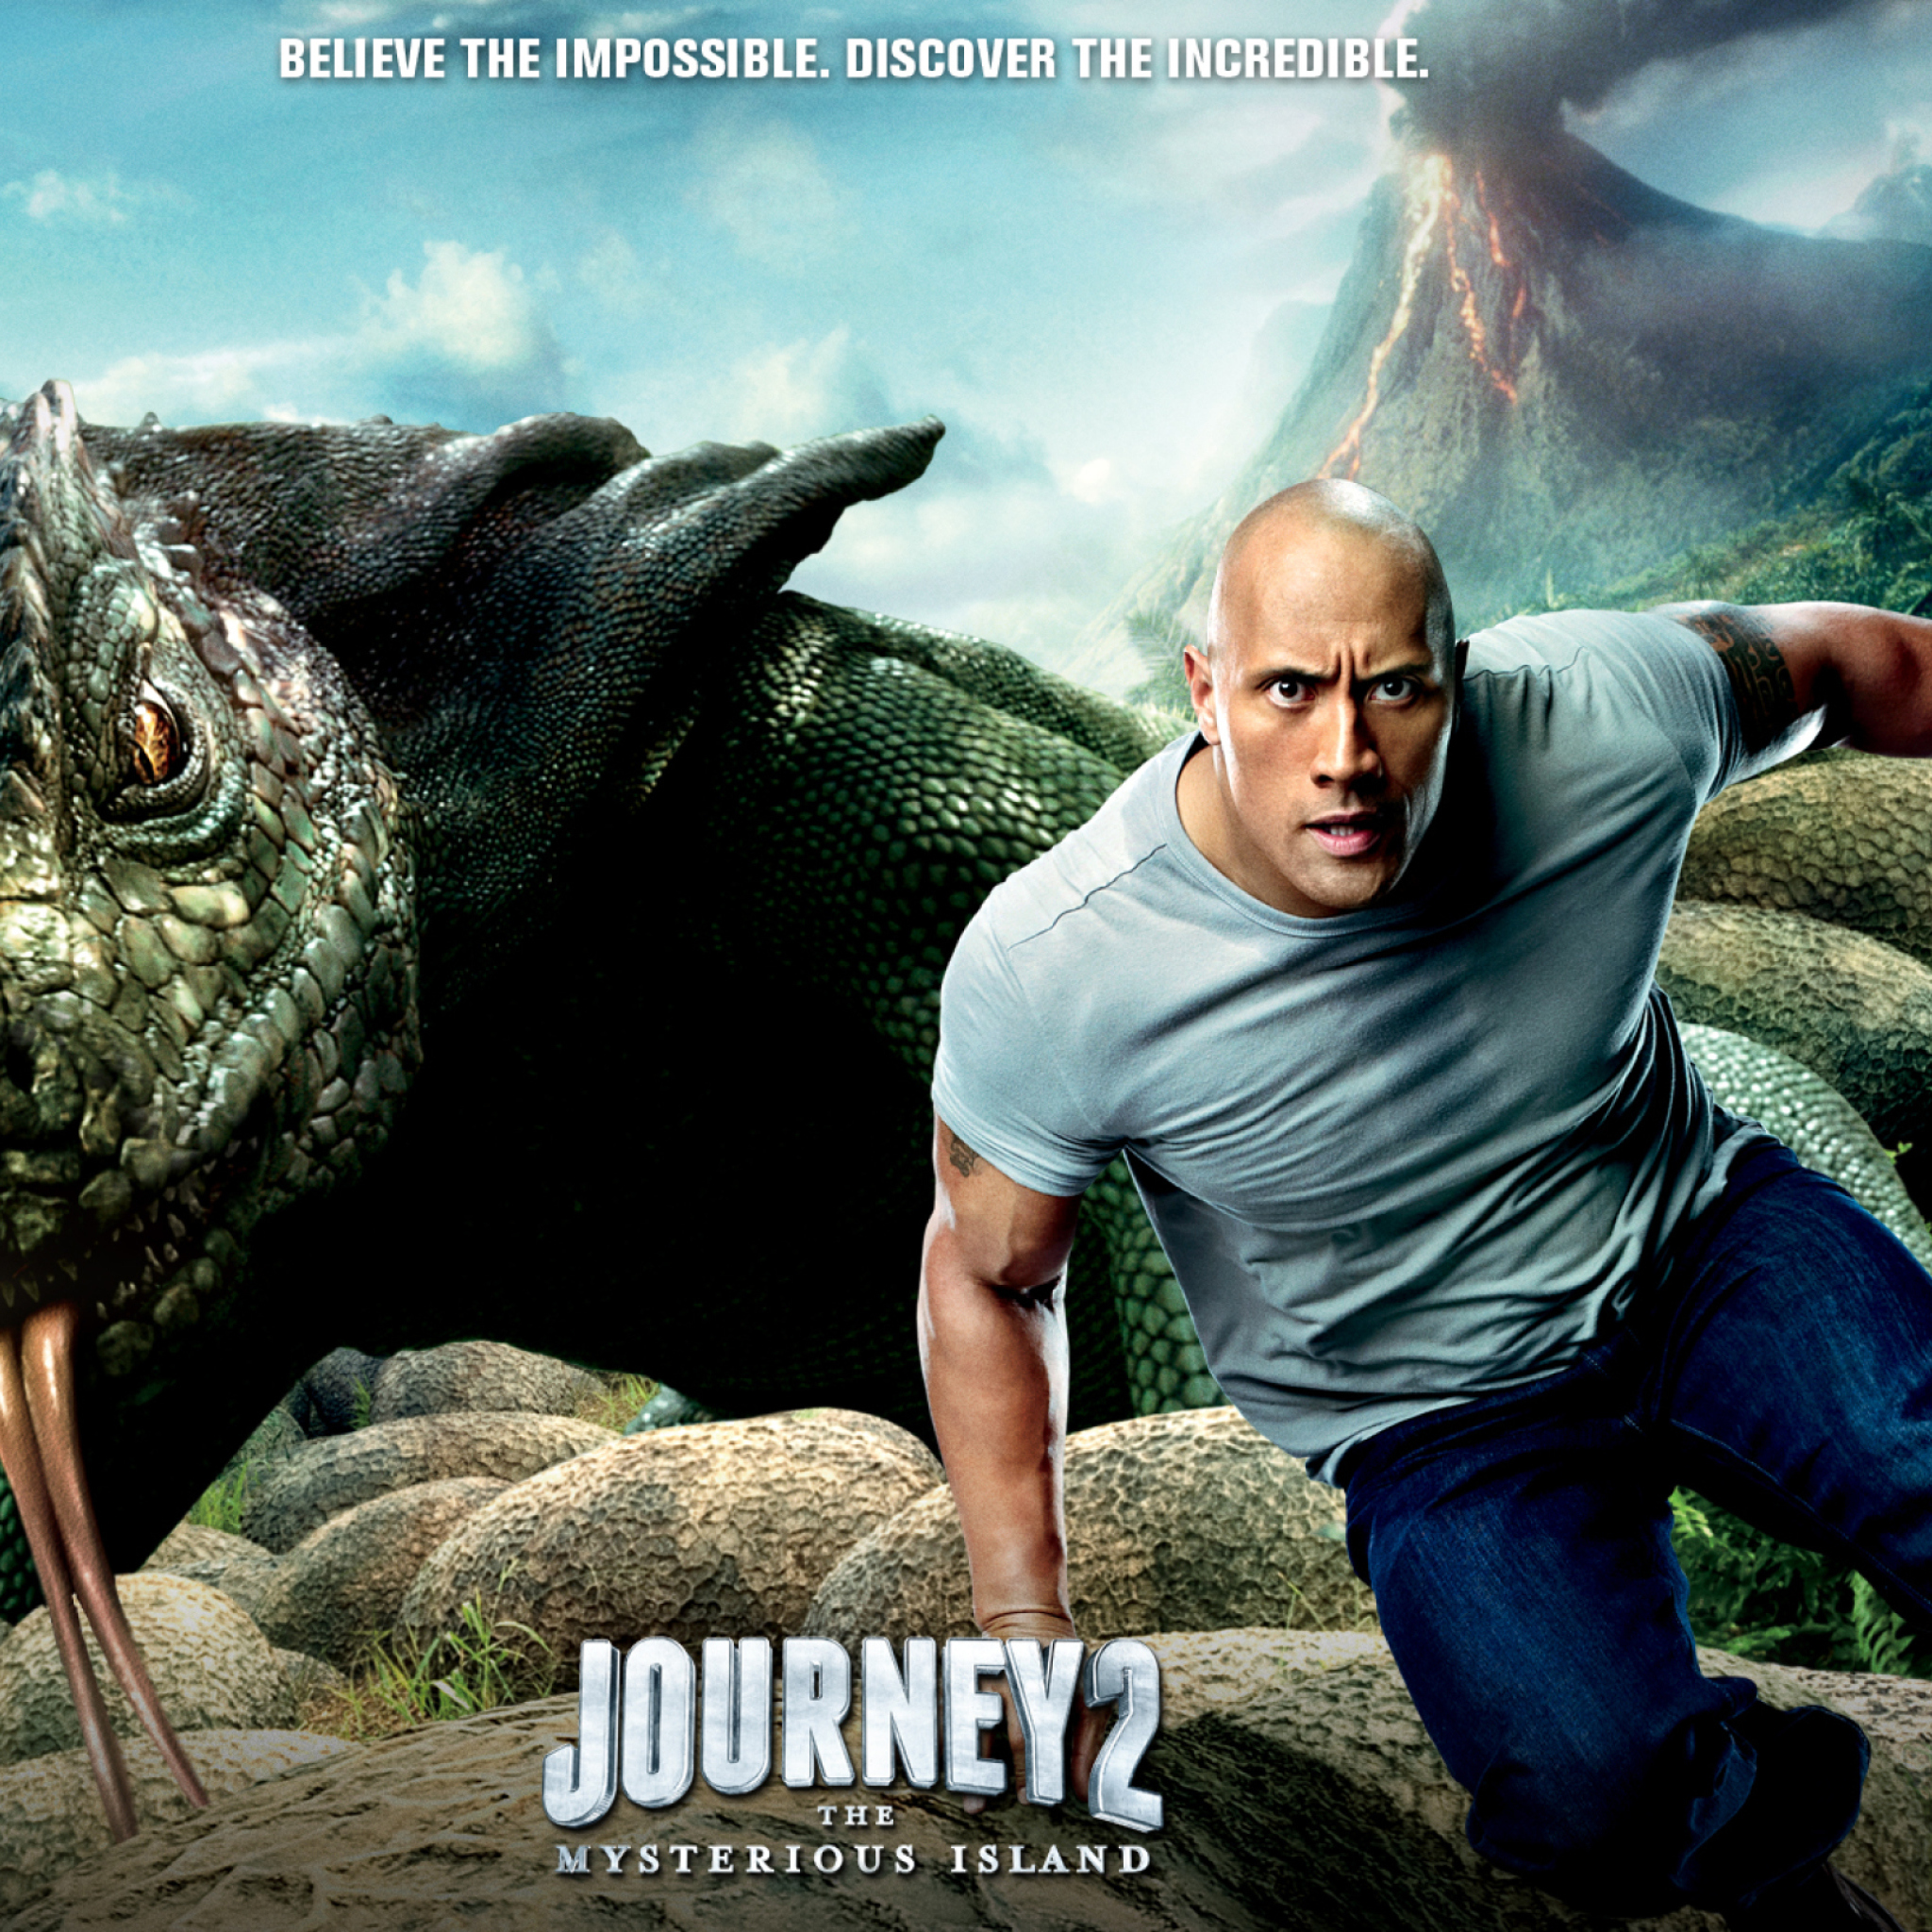 Dwayne Johnson In Journey 2: The Mysterious Island wallpaper 2048x2048